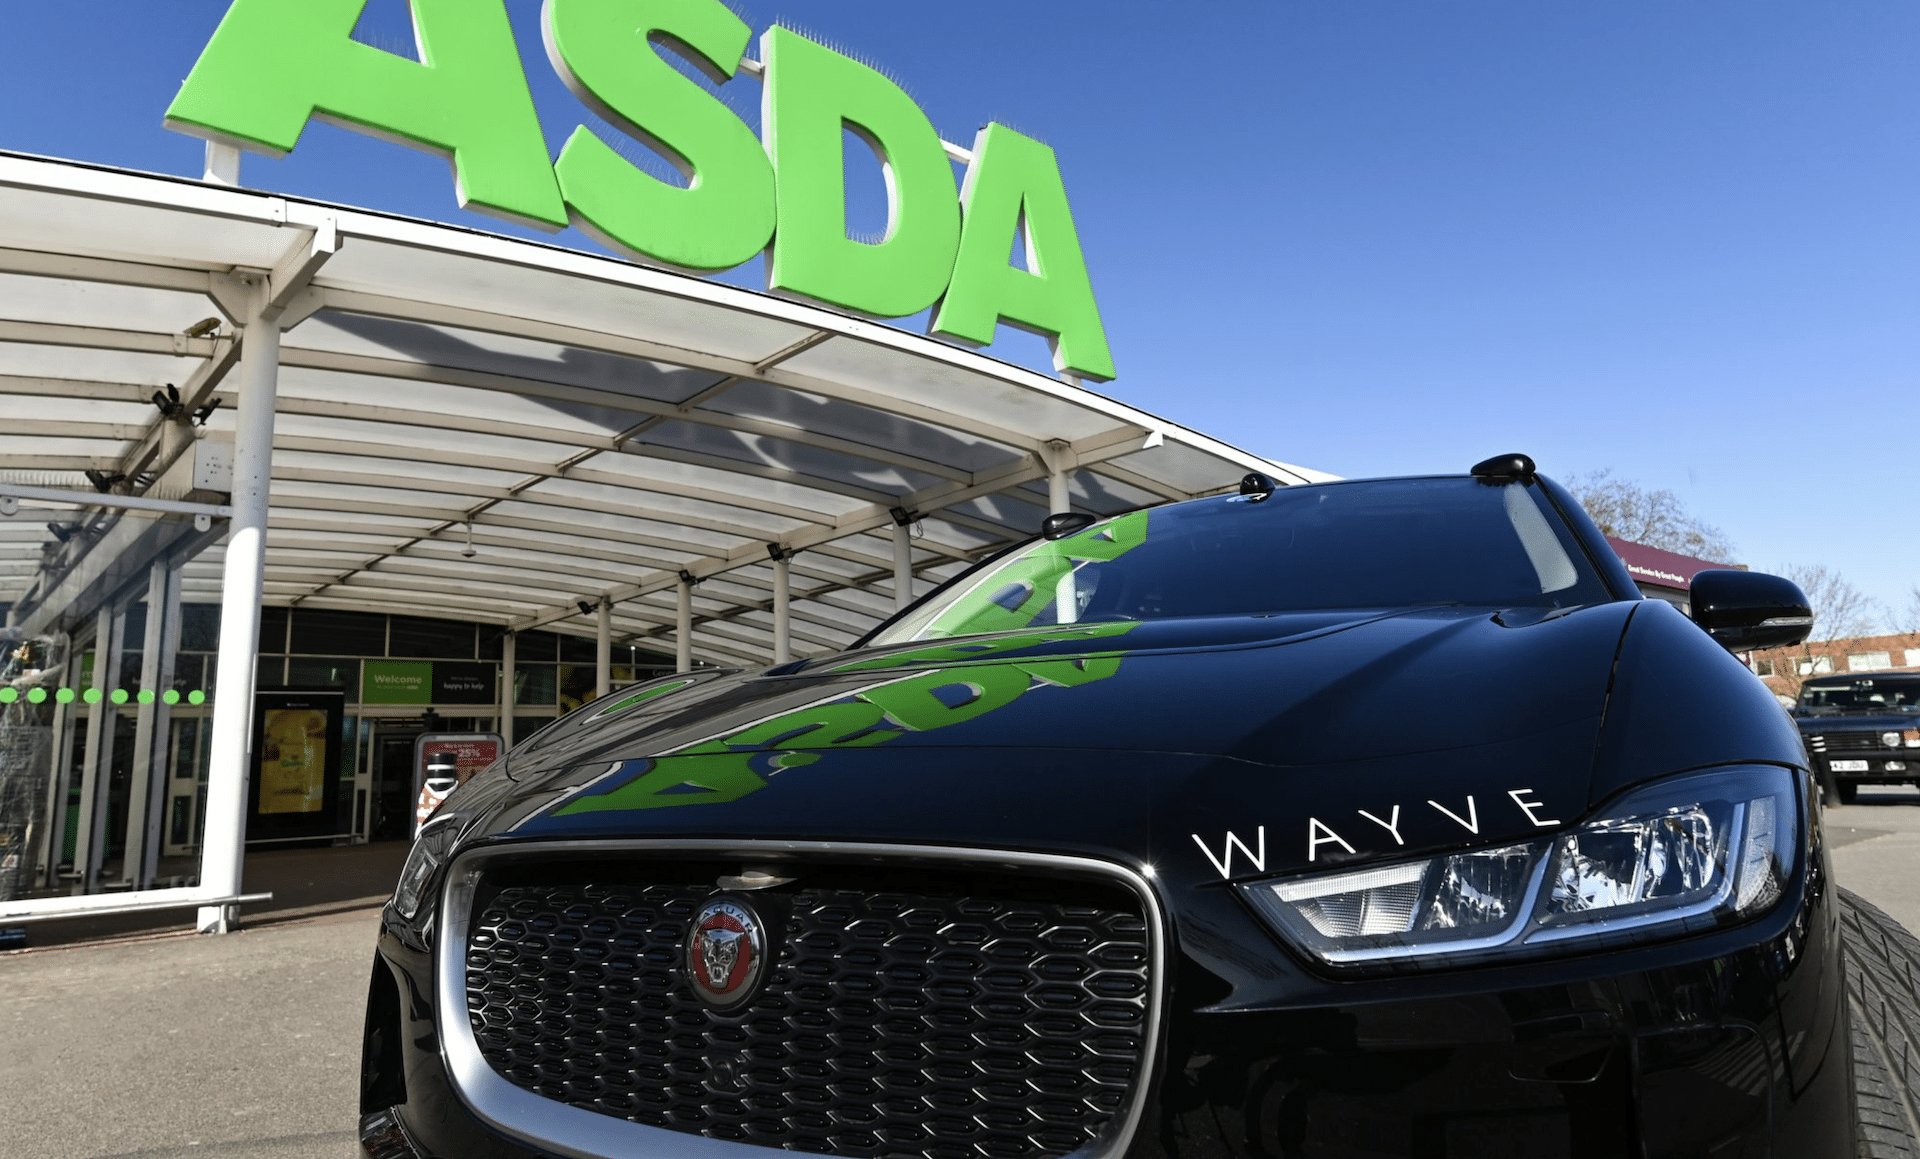 Asda and Wayve Launch UK's Largest Autonomous Grocery Delivery Trial